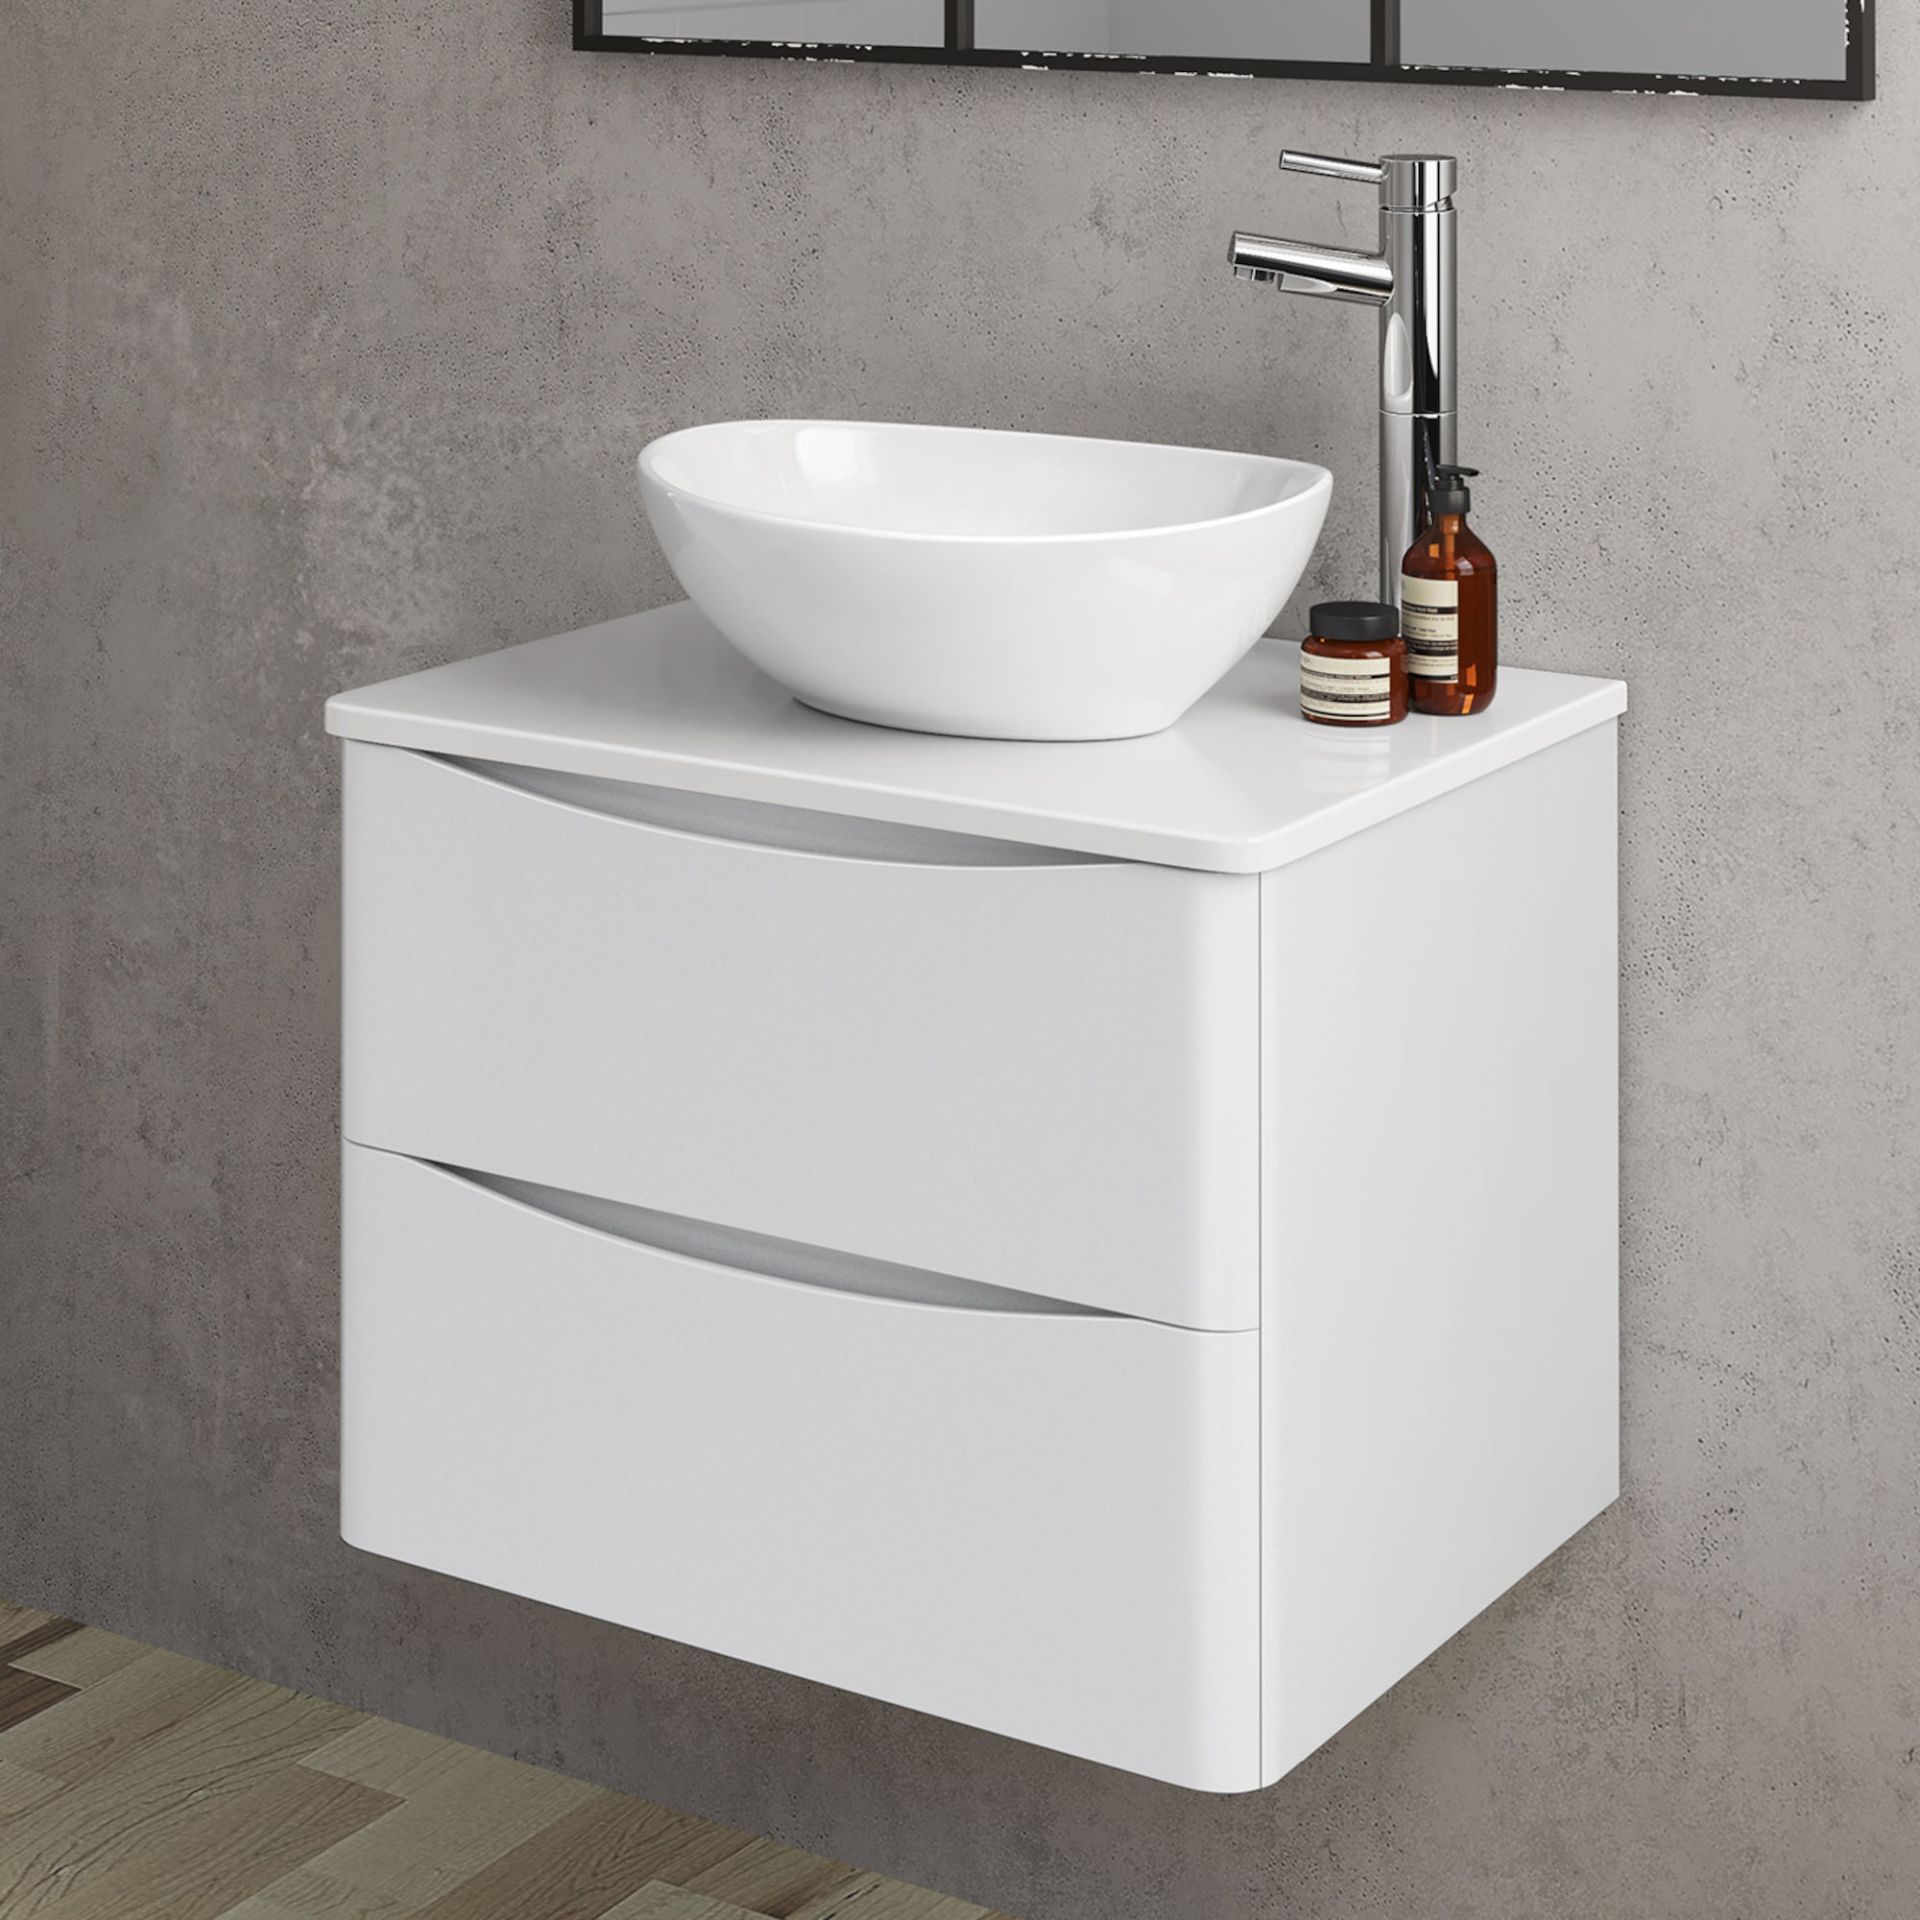 NEW 600mm Austin II Gloss White Countertop Unit and Camila Basin - Wall Hung. RRP £849.99.Come...